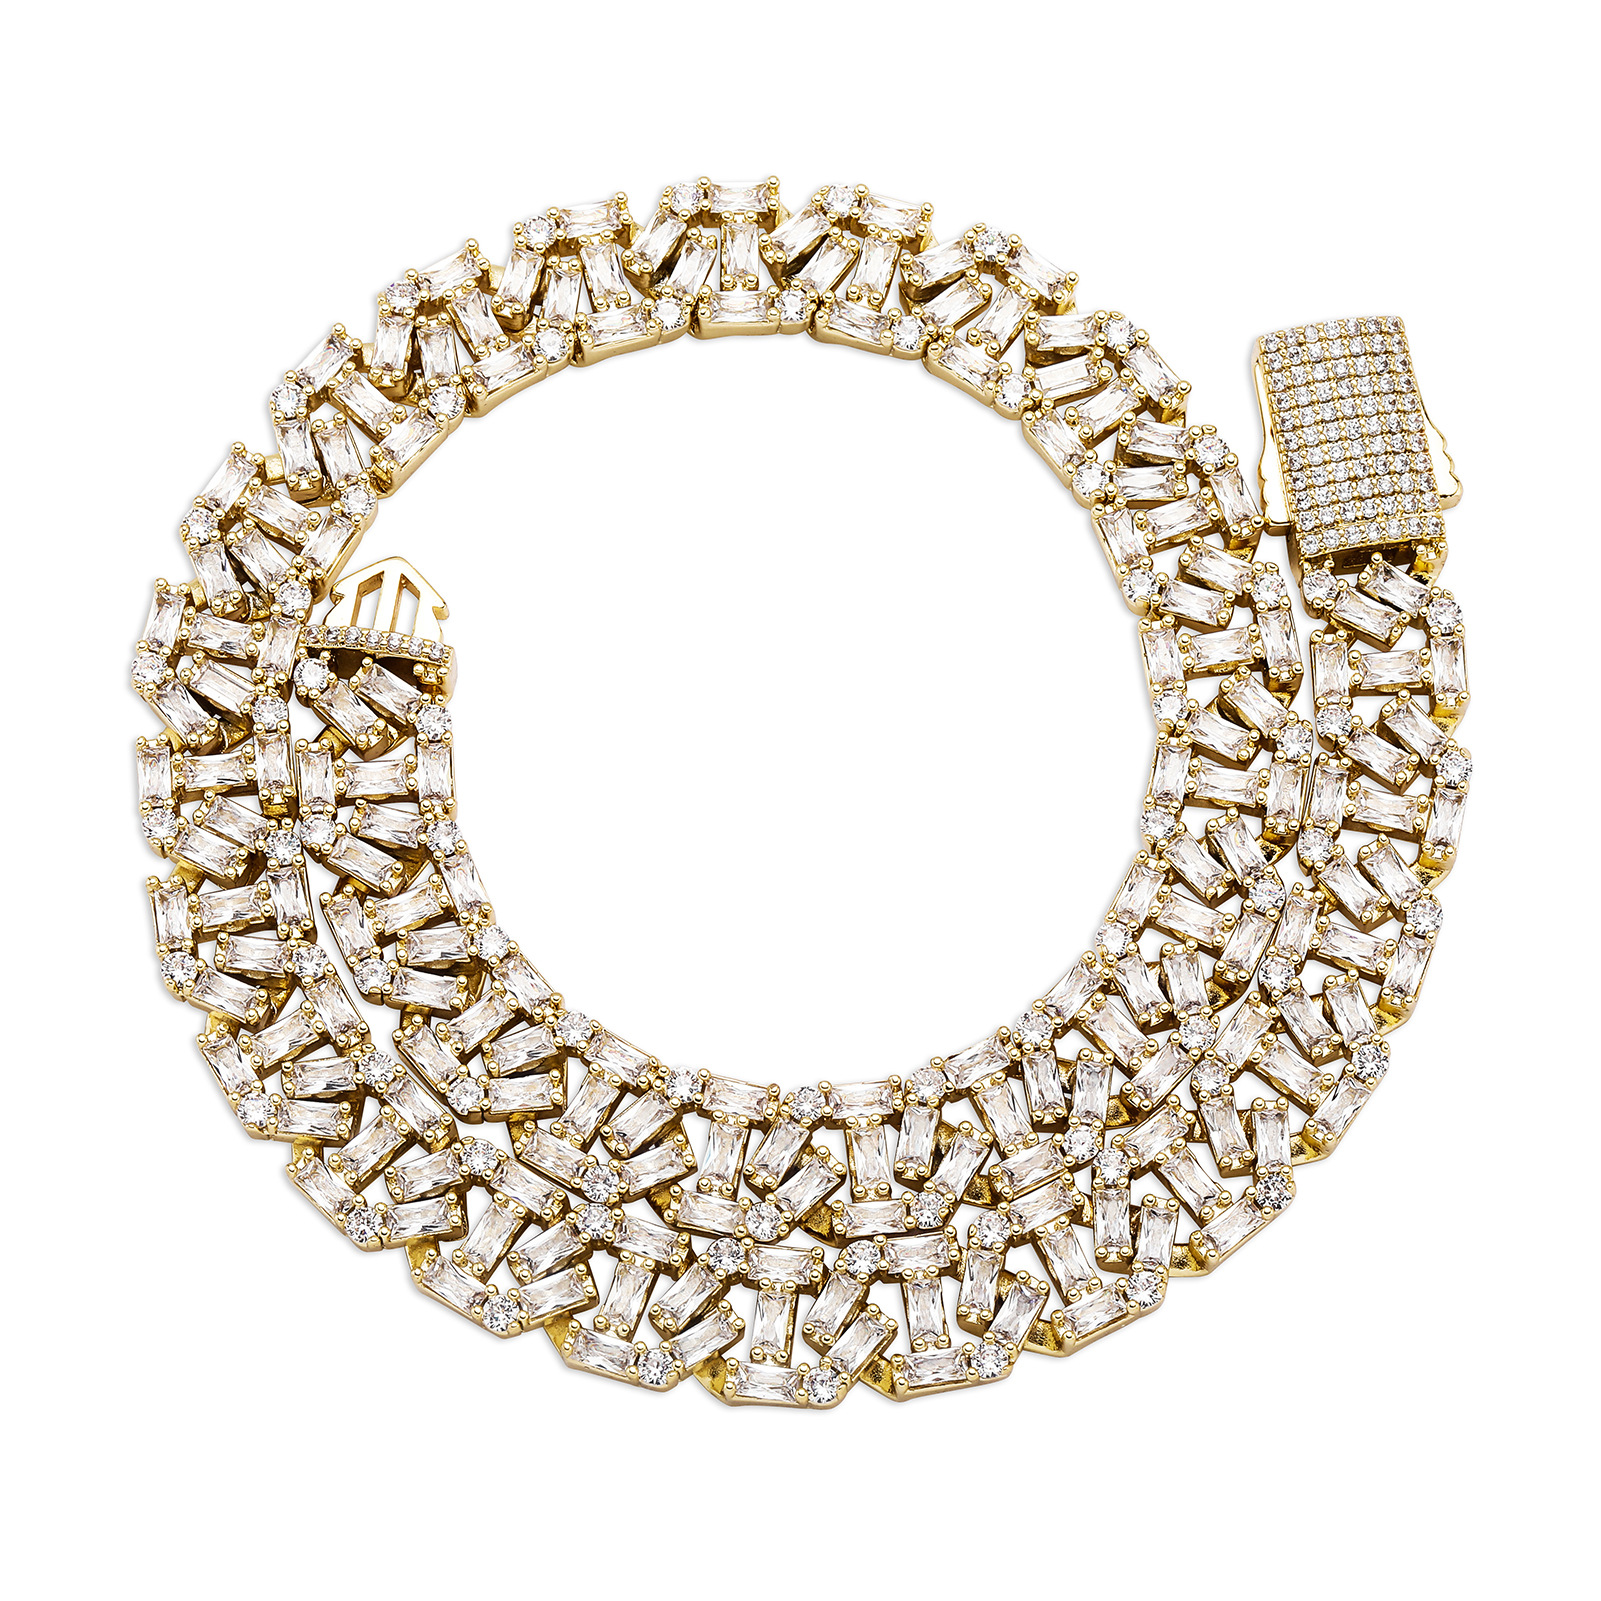 2:Necklacet gold 22 inch